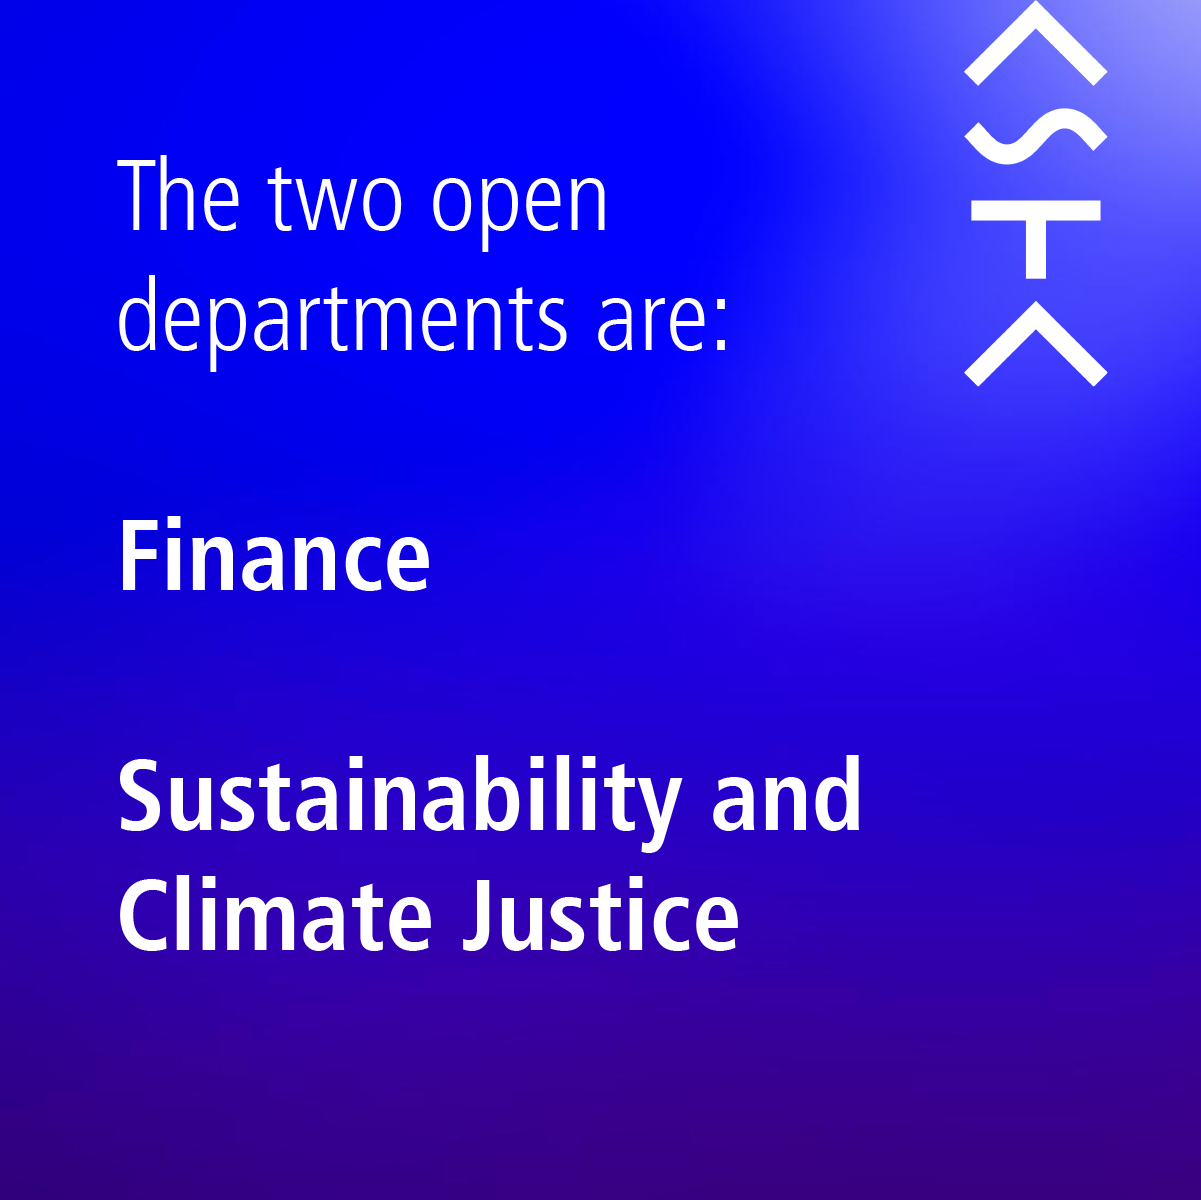 The two open departments are: Finance. Sustainability and Climate Justice.